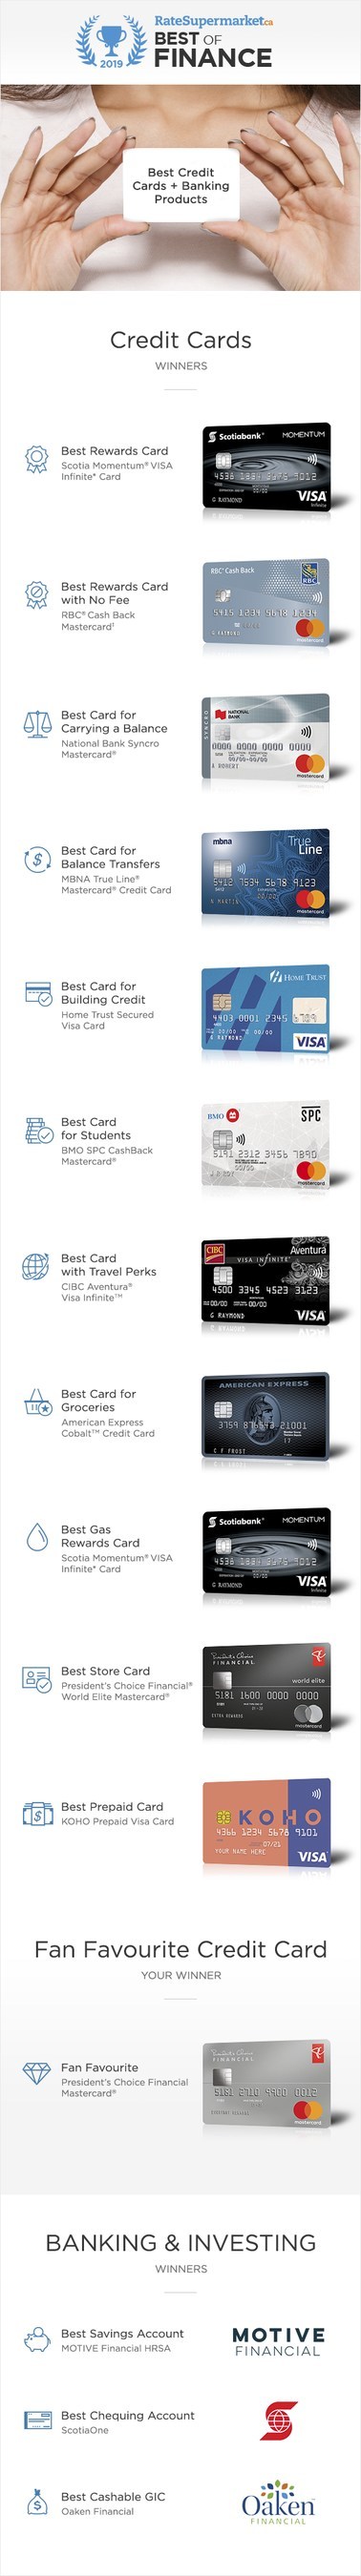 Eighth Annual Report Reveals Canada’s Best Credit Cards and Personal Banking Products for 2019 - Best of Finance 2019 (CNW Group/RateSupermarket.ca)